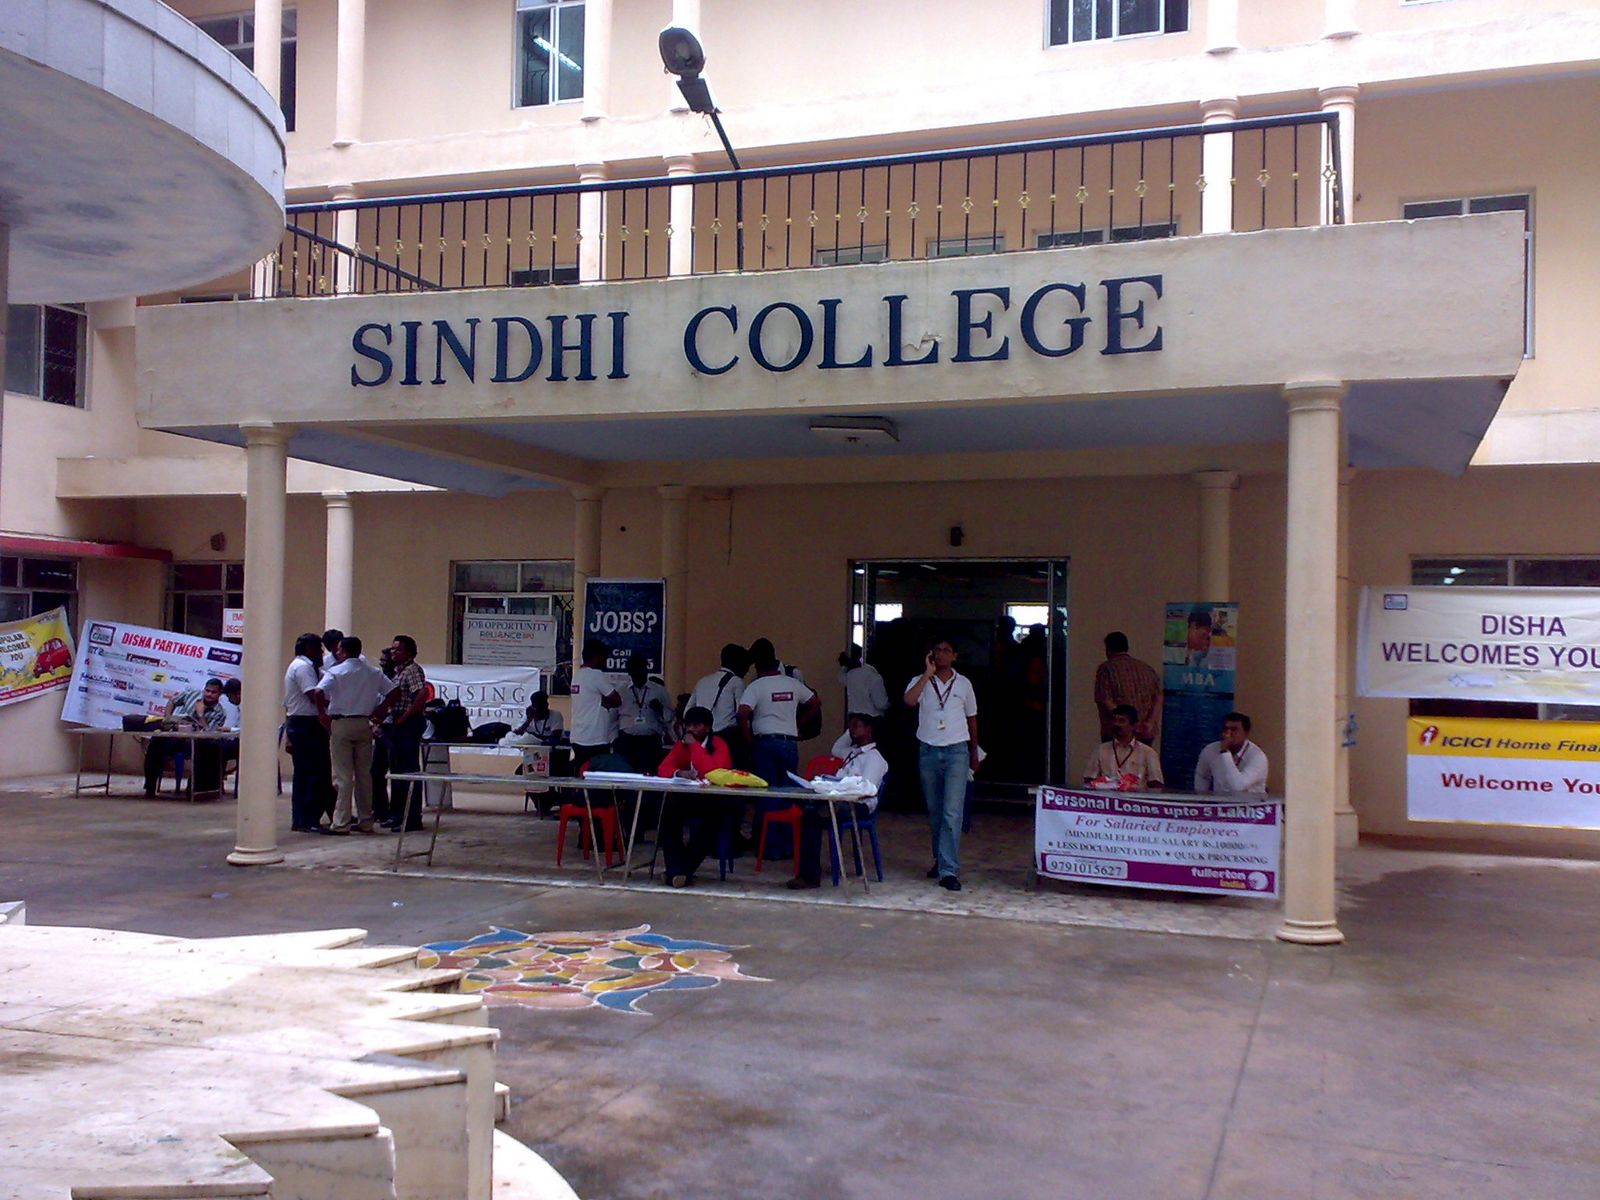 Sindhi College Of Arts And Science, Chennai - Sindhi College Of Arts And Science Chennai , HD Wallpaper & Backgrounds